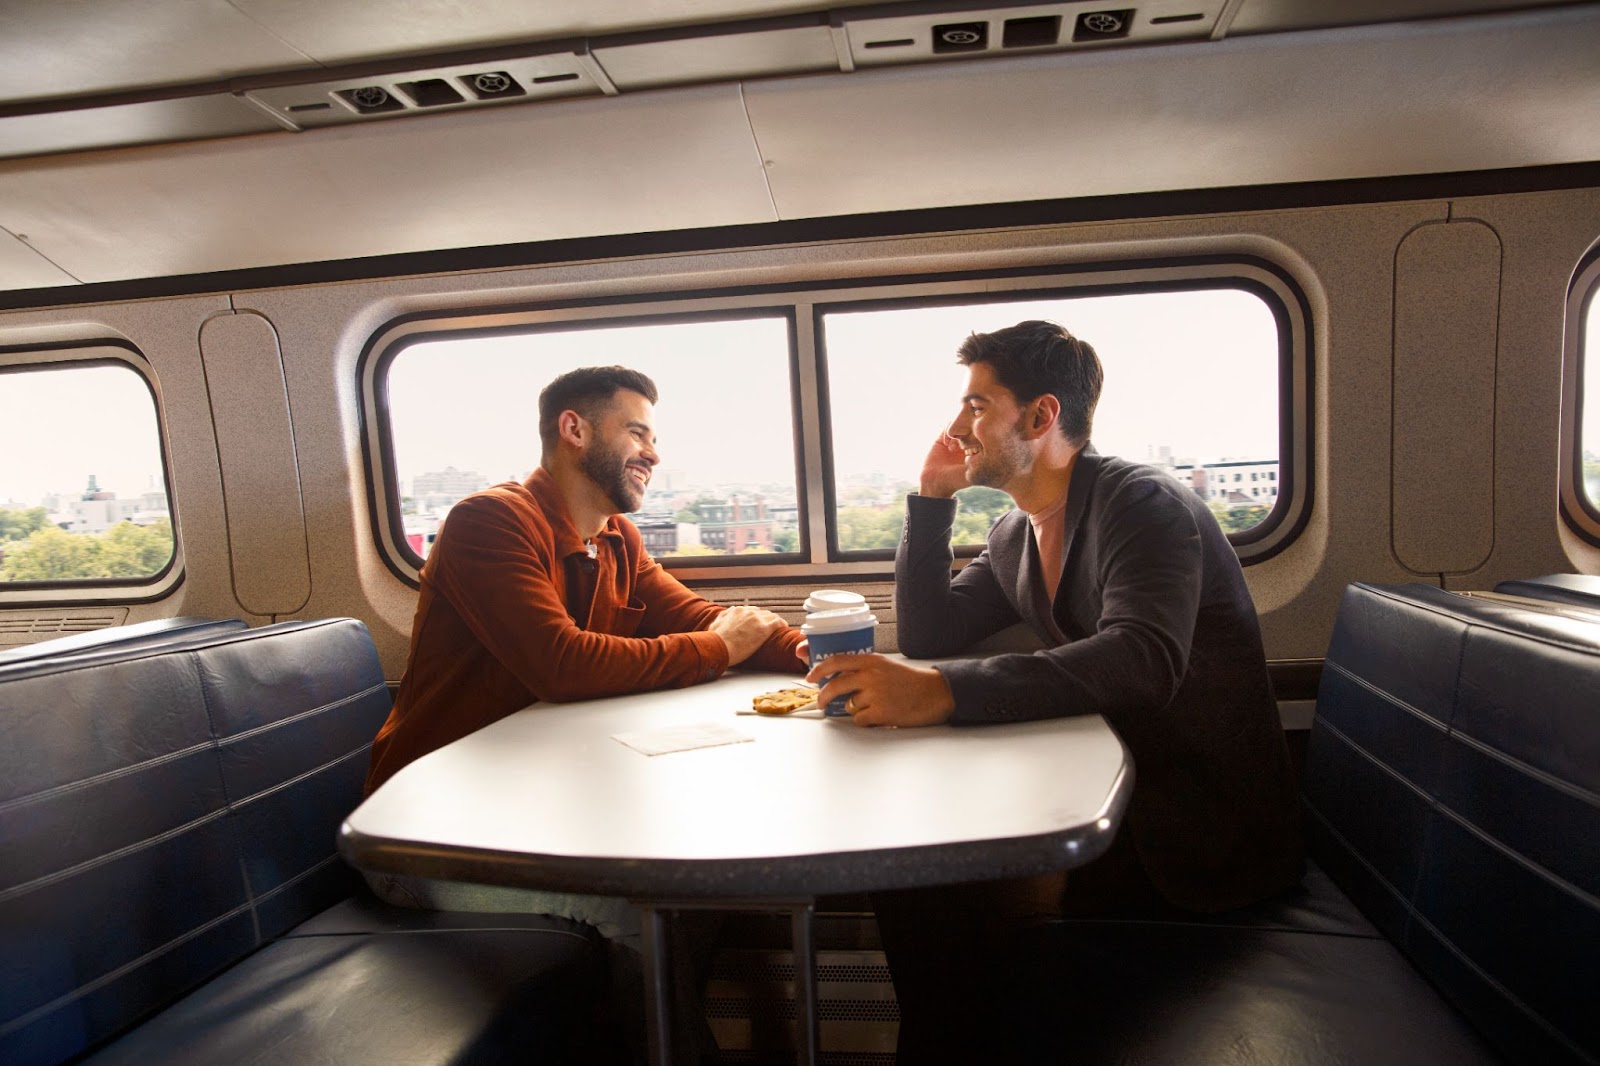 Two travelers share coffee at a table in the train's dining car.